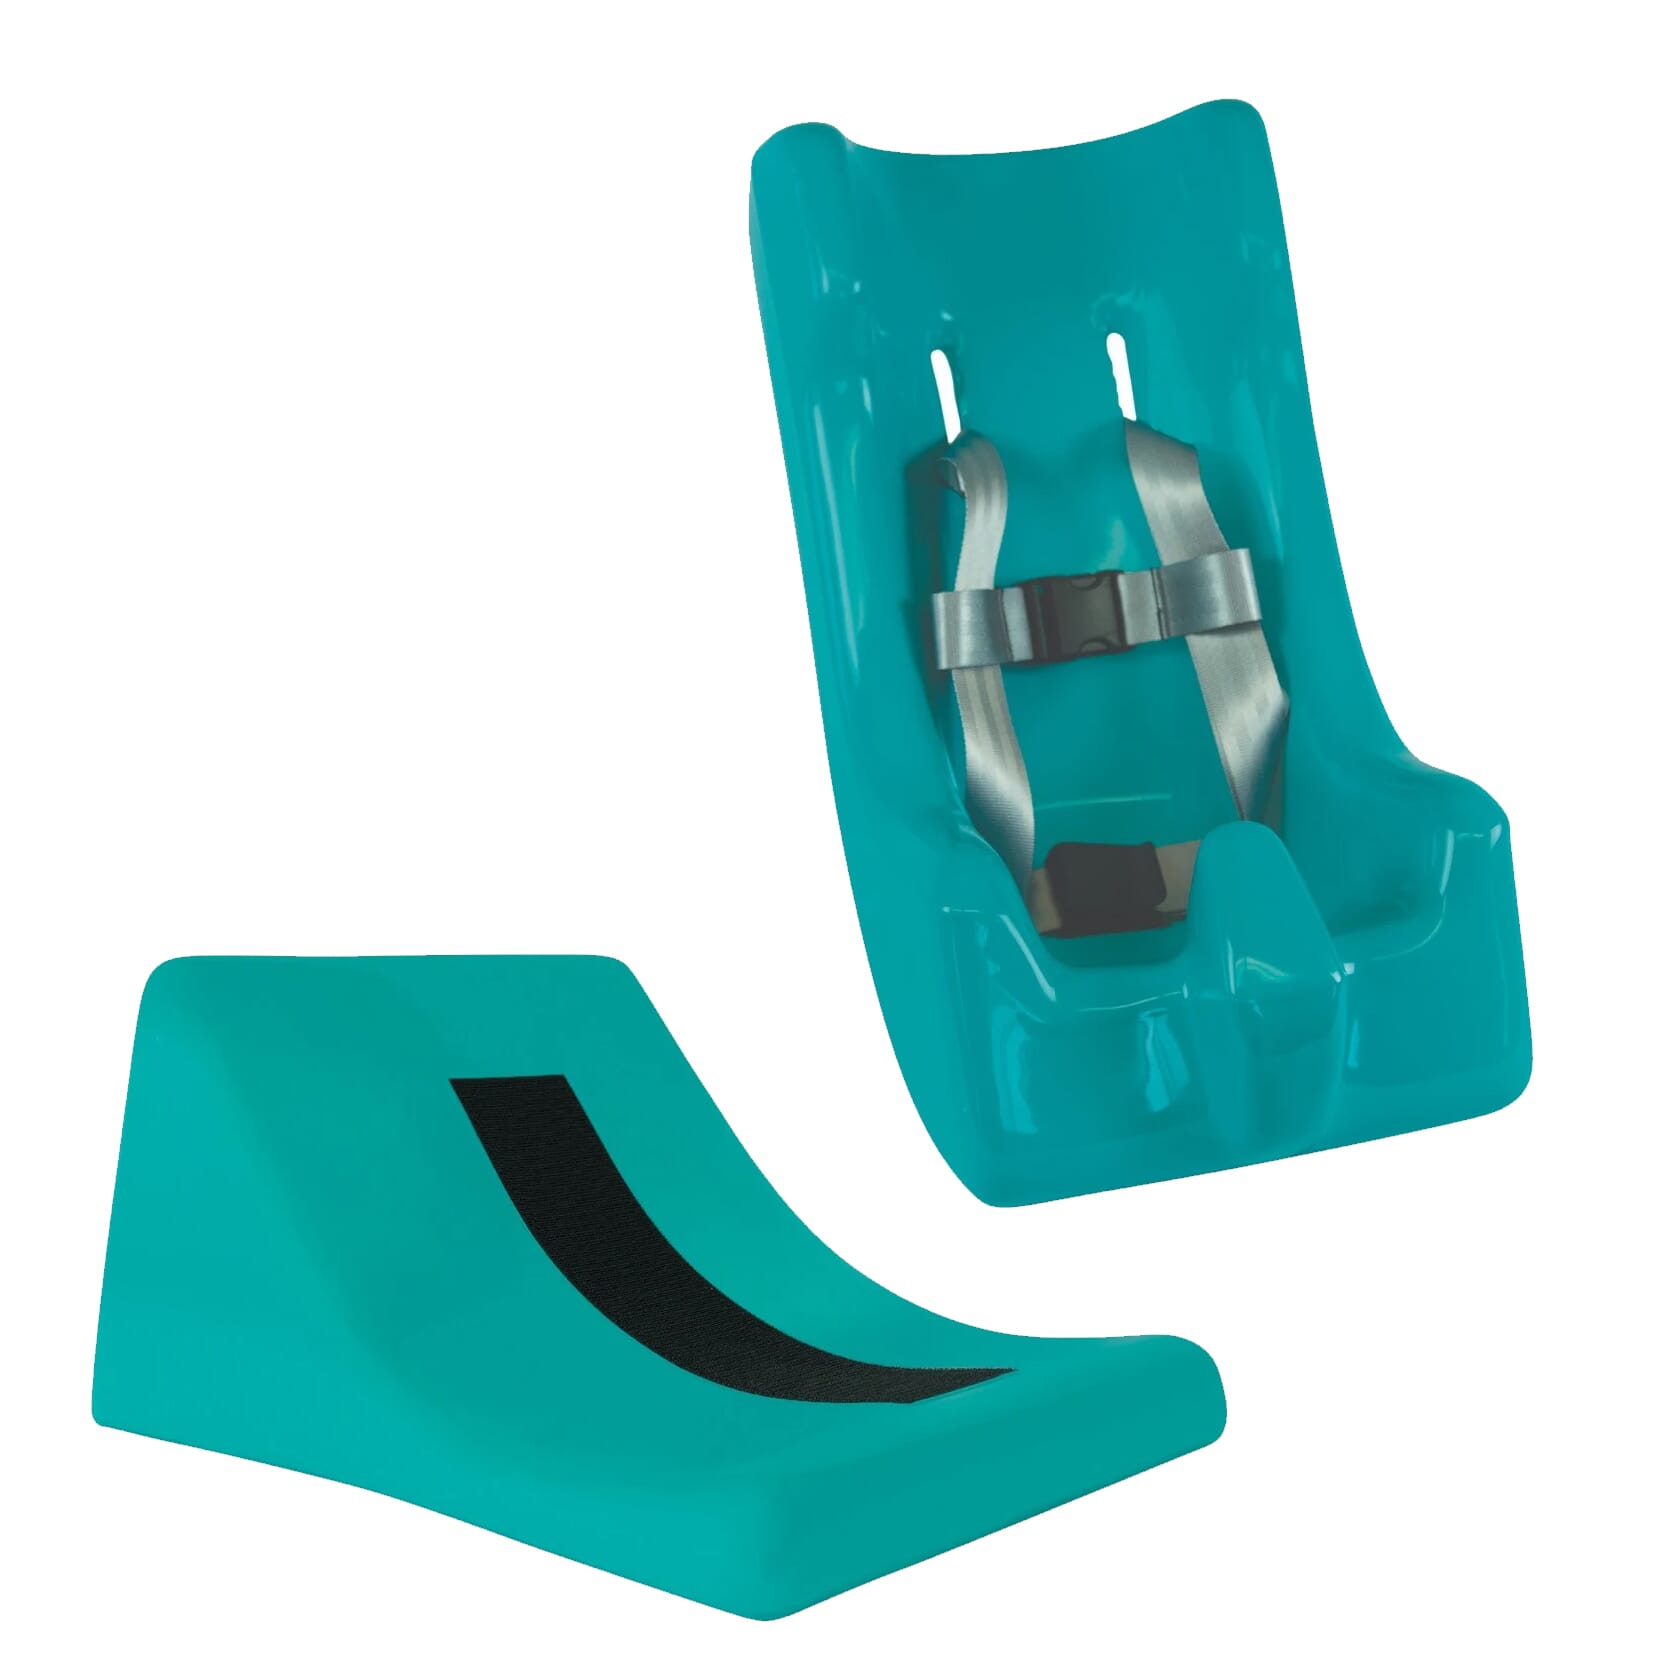 View Tumble Forms Deluxe Floor Sitter Set Small Teal information